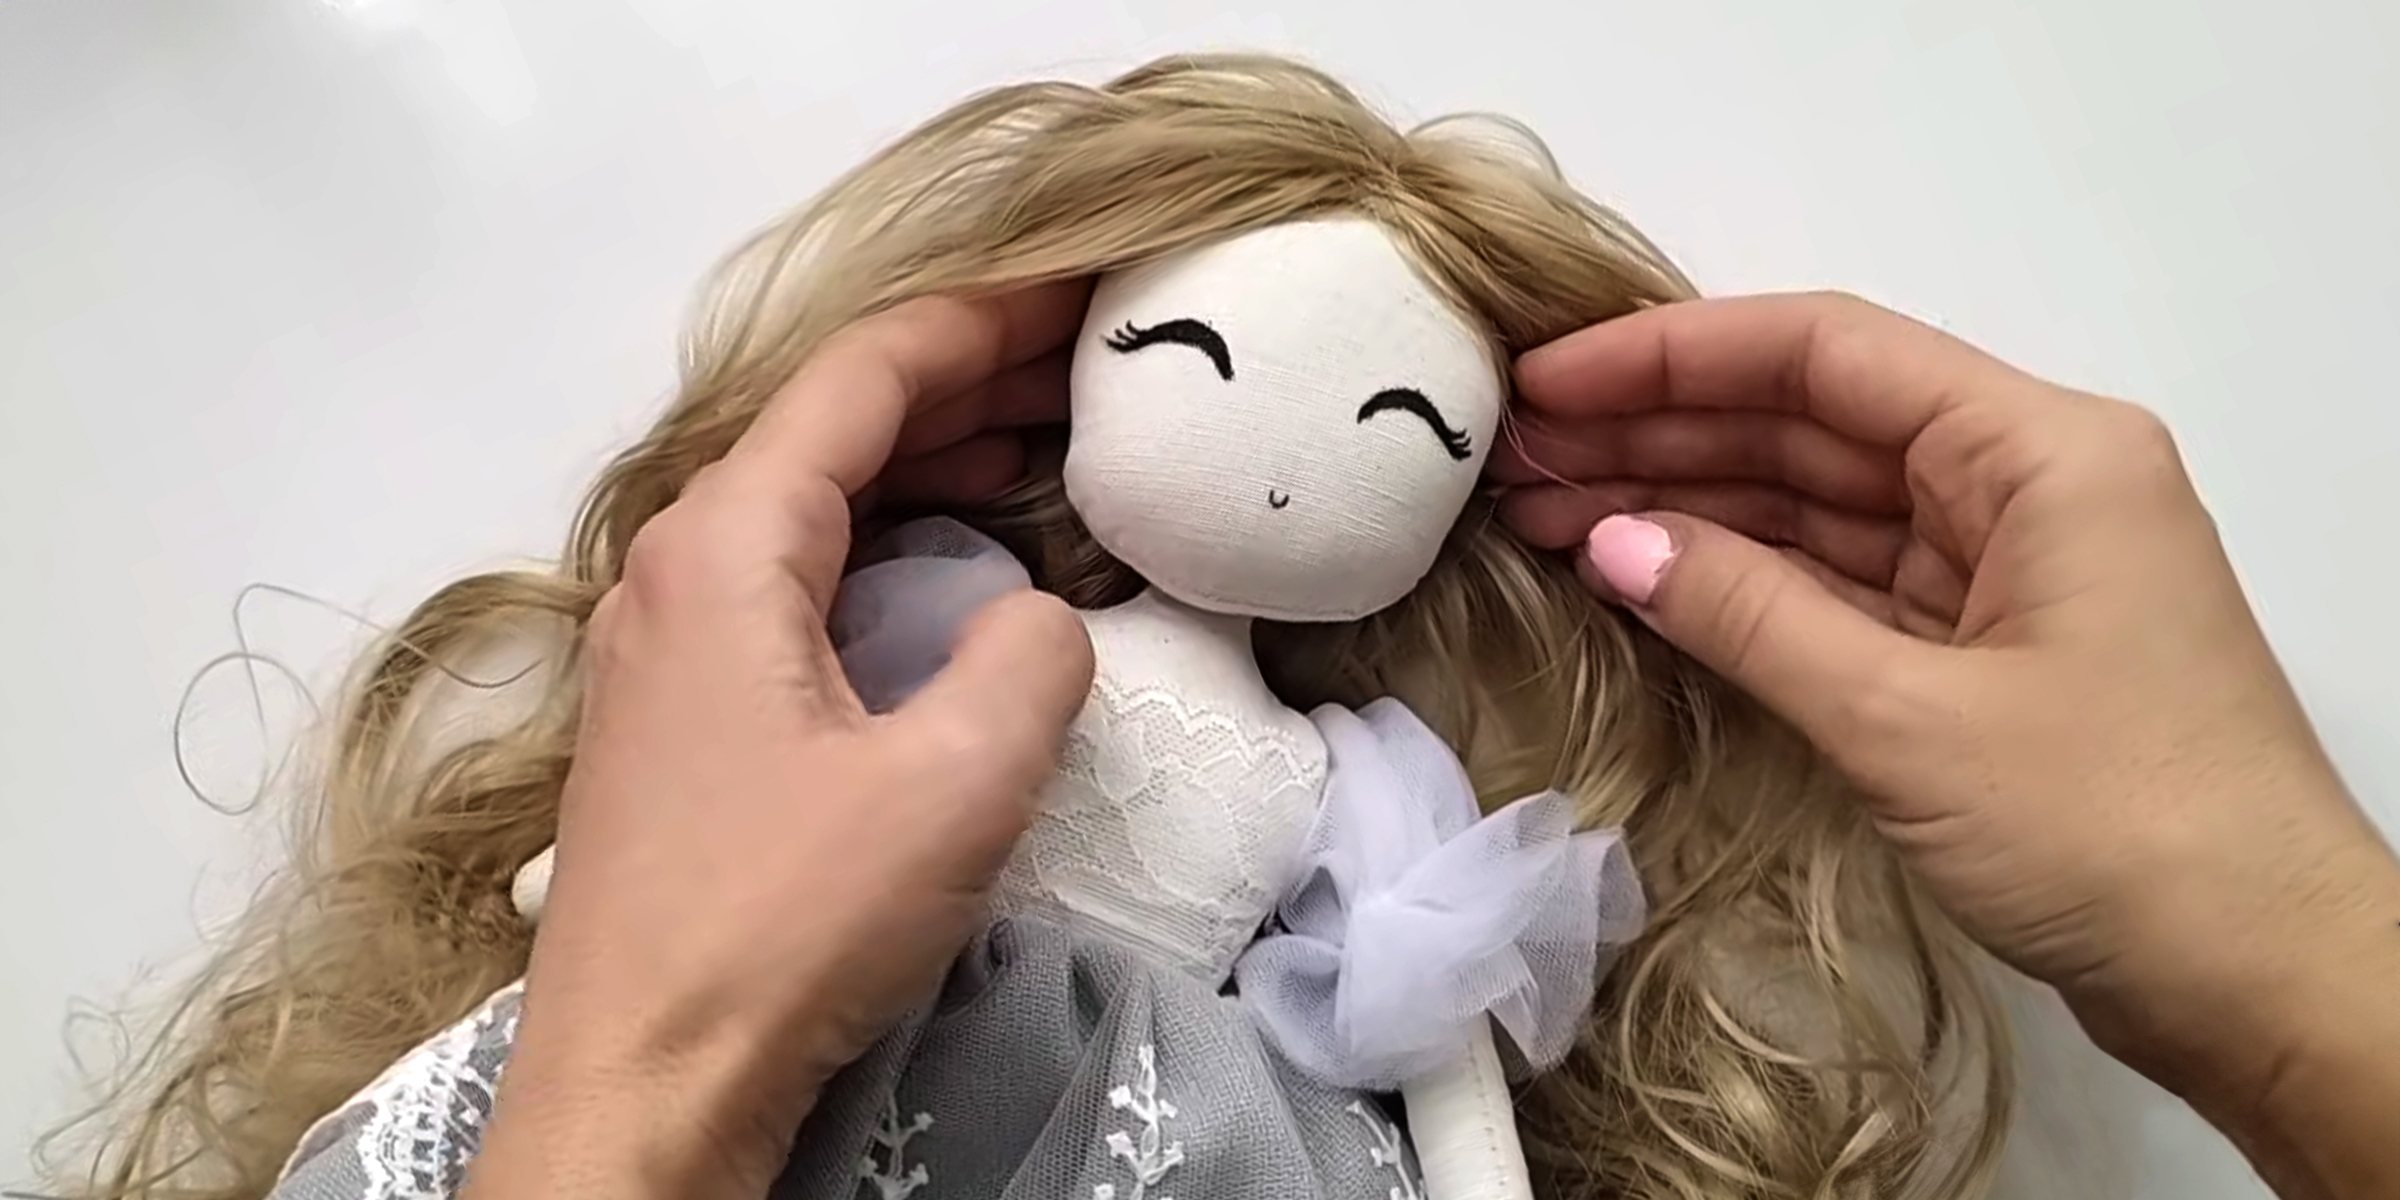 A person's hands and a doll | Source: YouTube/CraftyGirlShirin